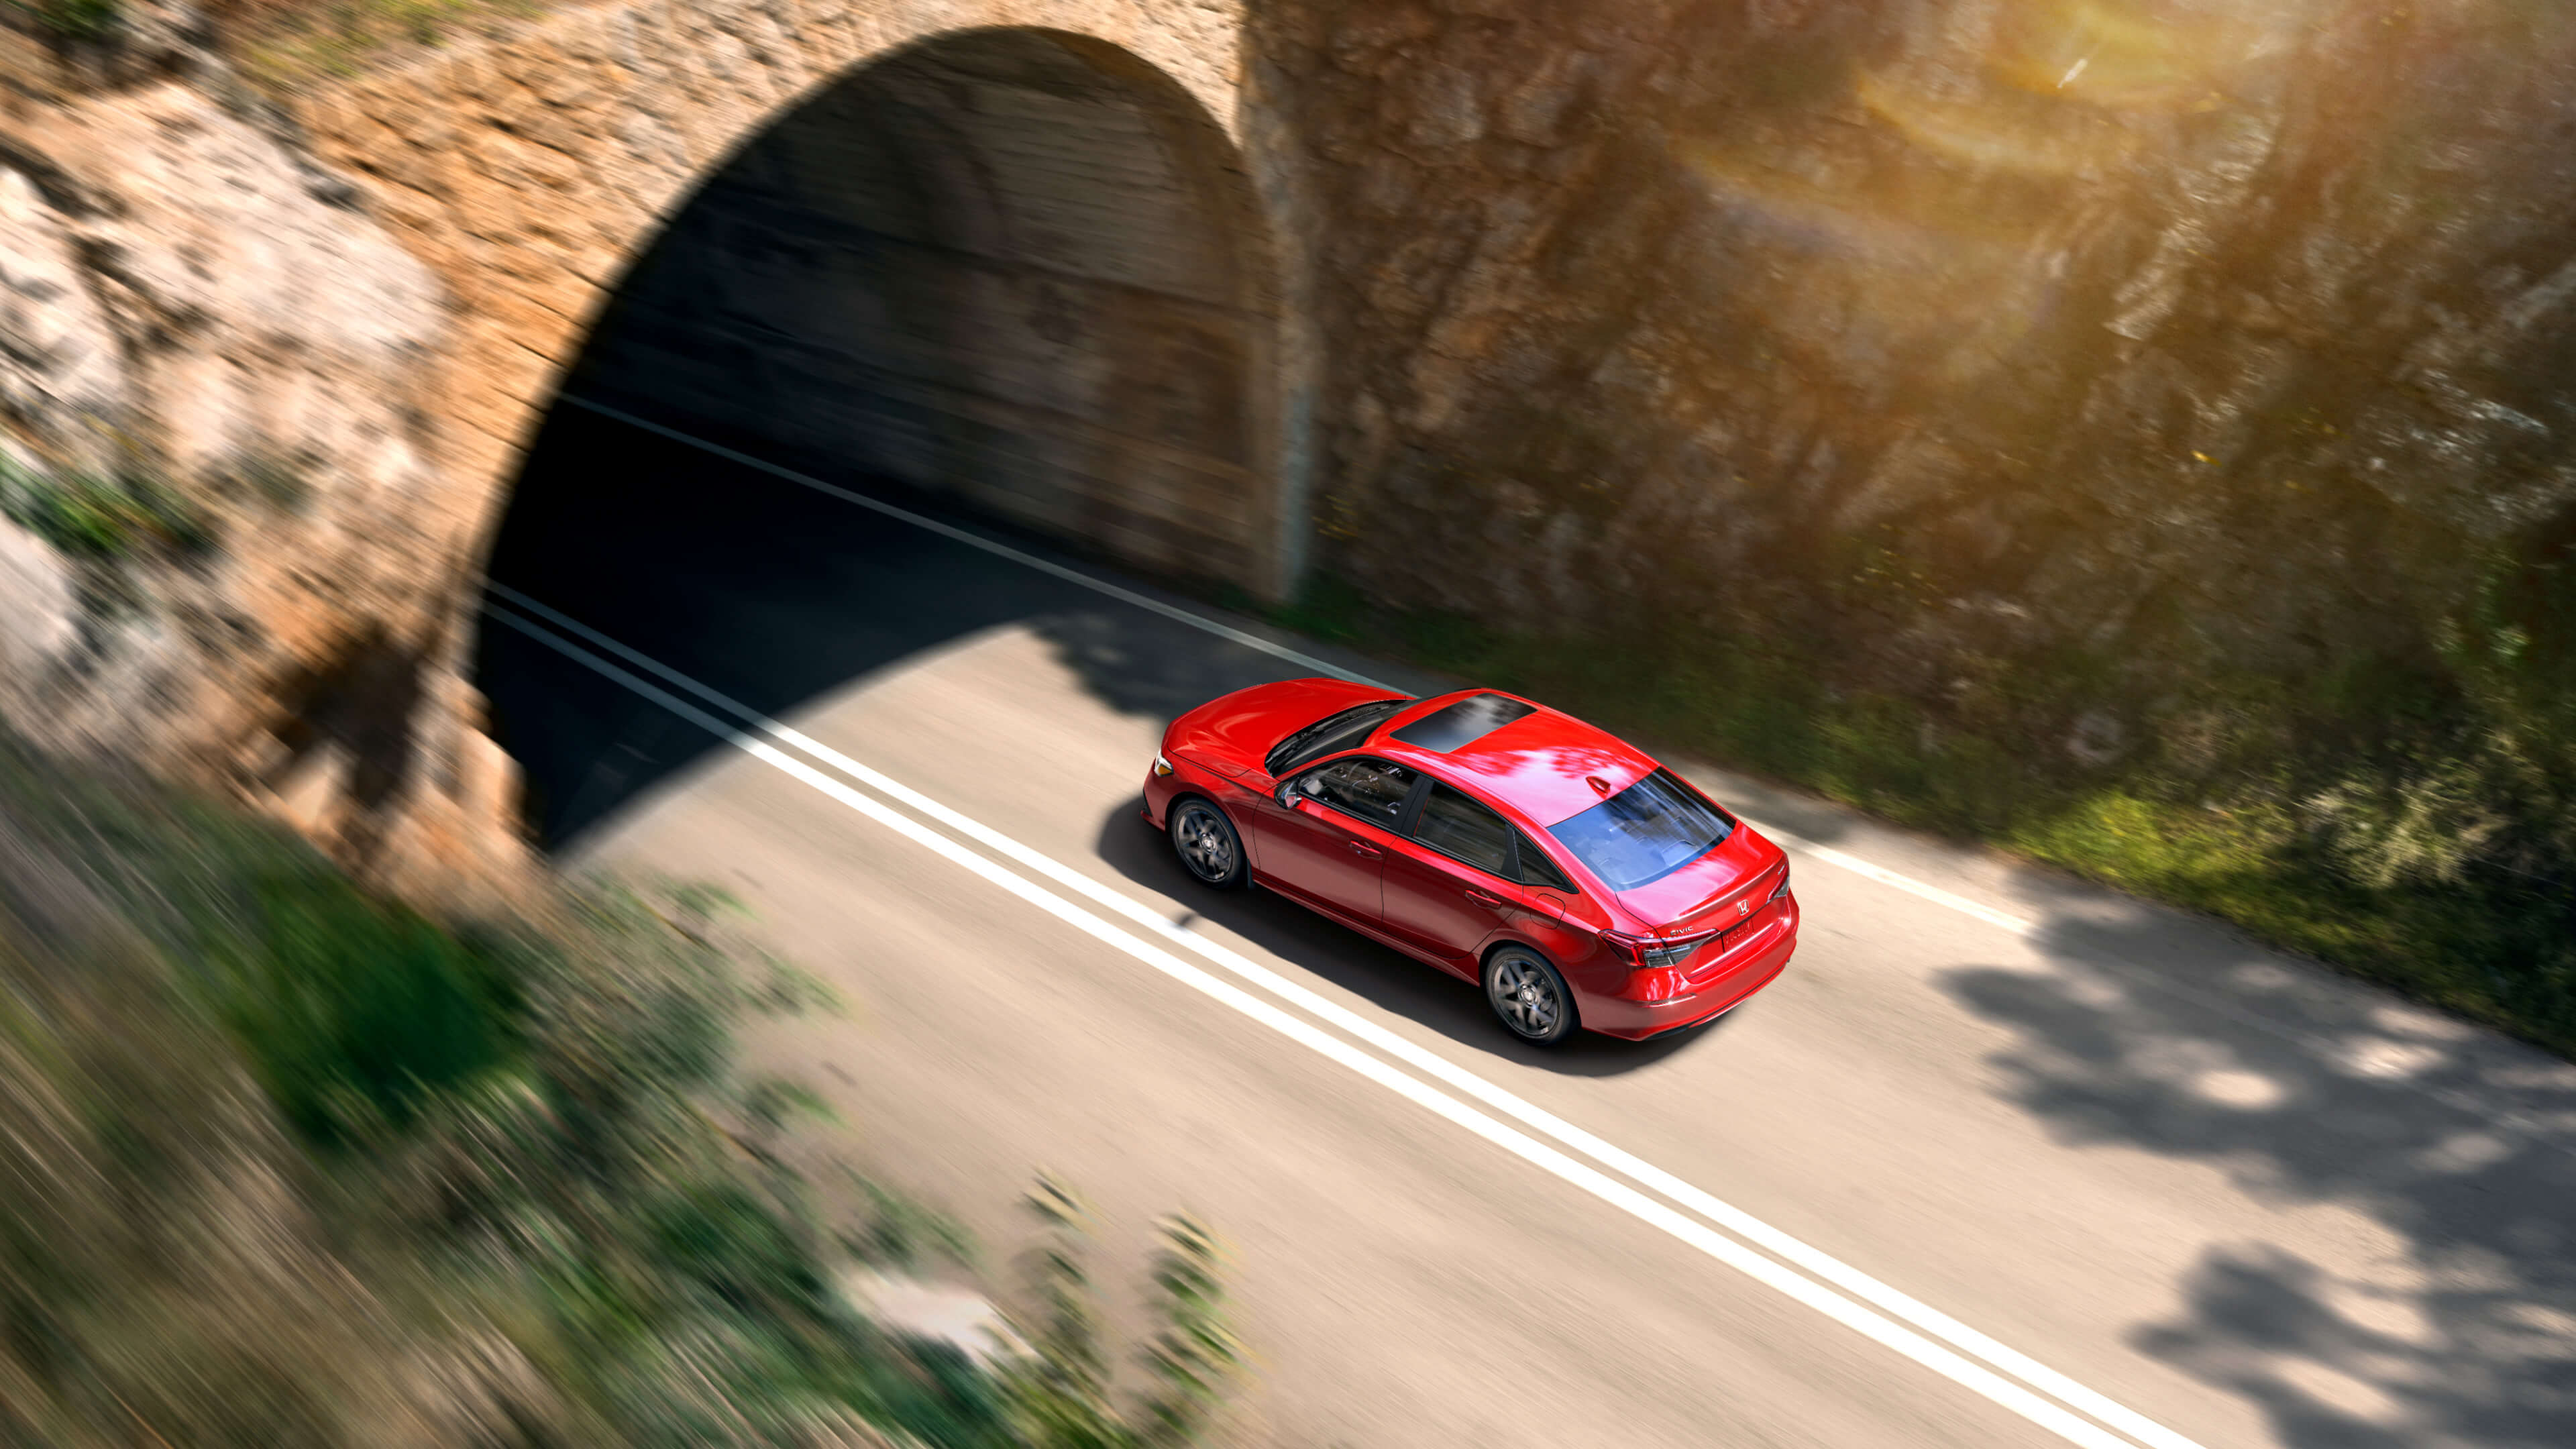 An overhead scenic shot giving a Birdseye view of a red 2022 Honda Civic about to drive through a stone tunnel.